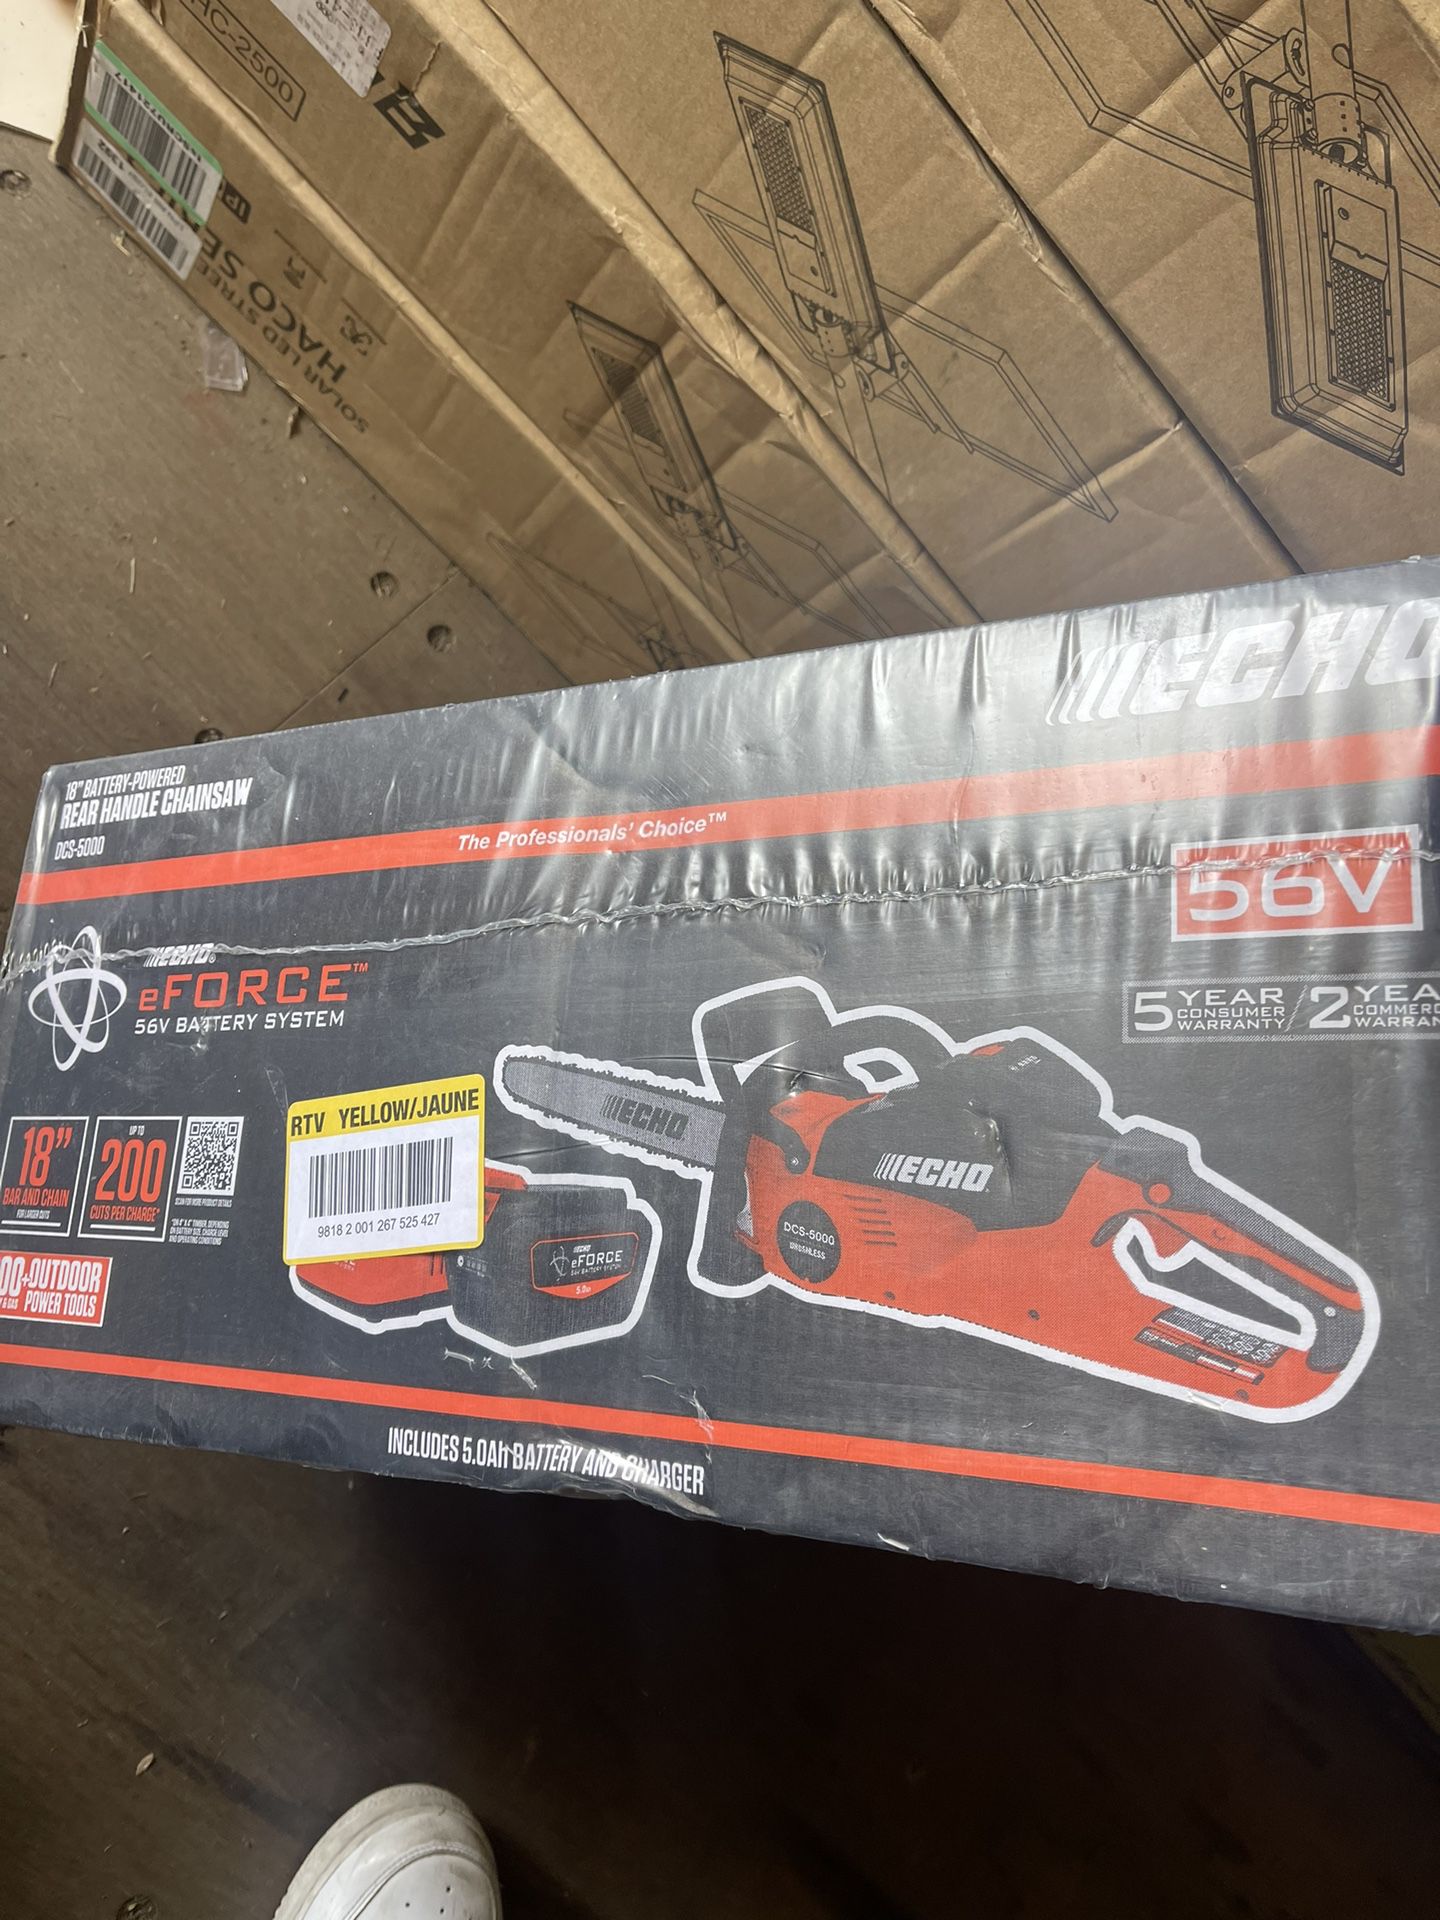 ECHO eFORCE 18 in. 56V Cordless Electric Battery Brushless Rear Handle Chainsaw Kit with 5.0Ah Battery and Charger (164)